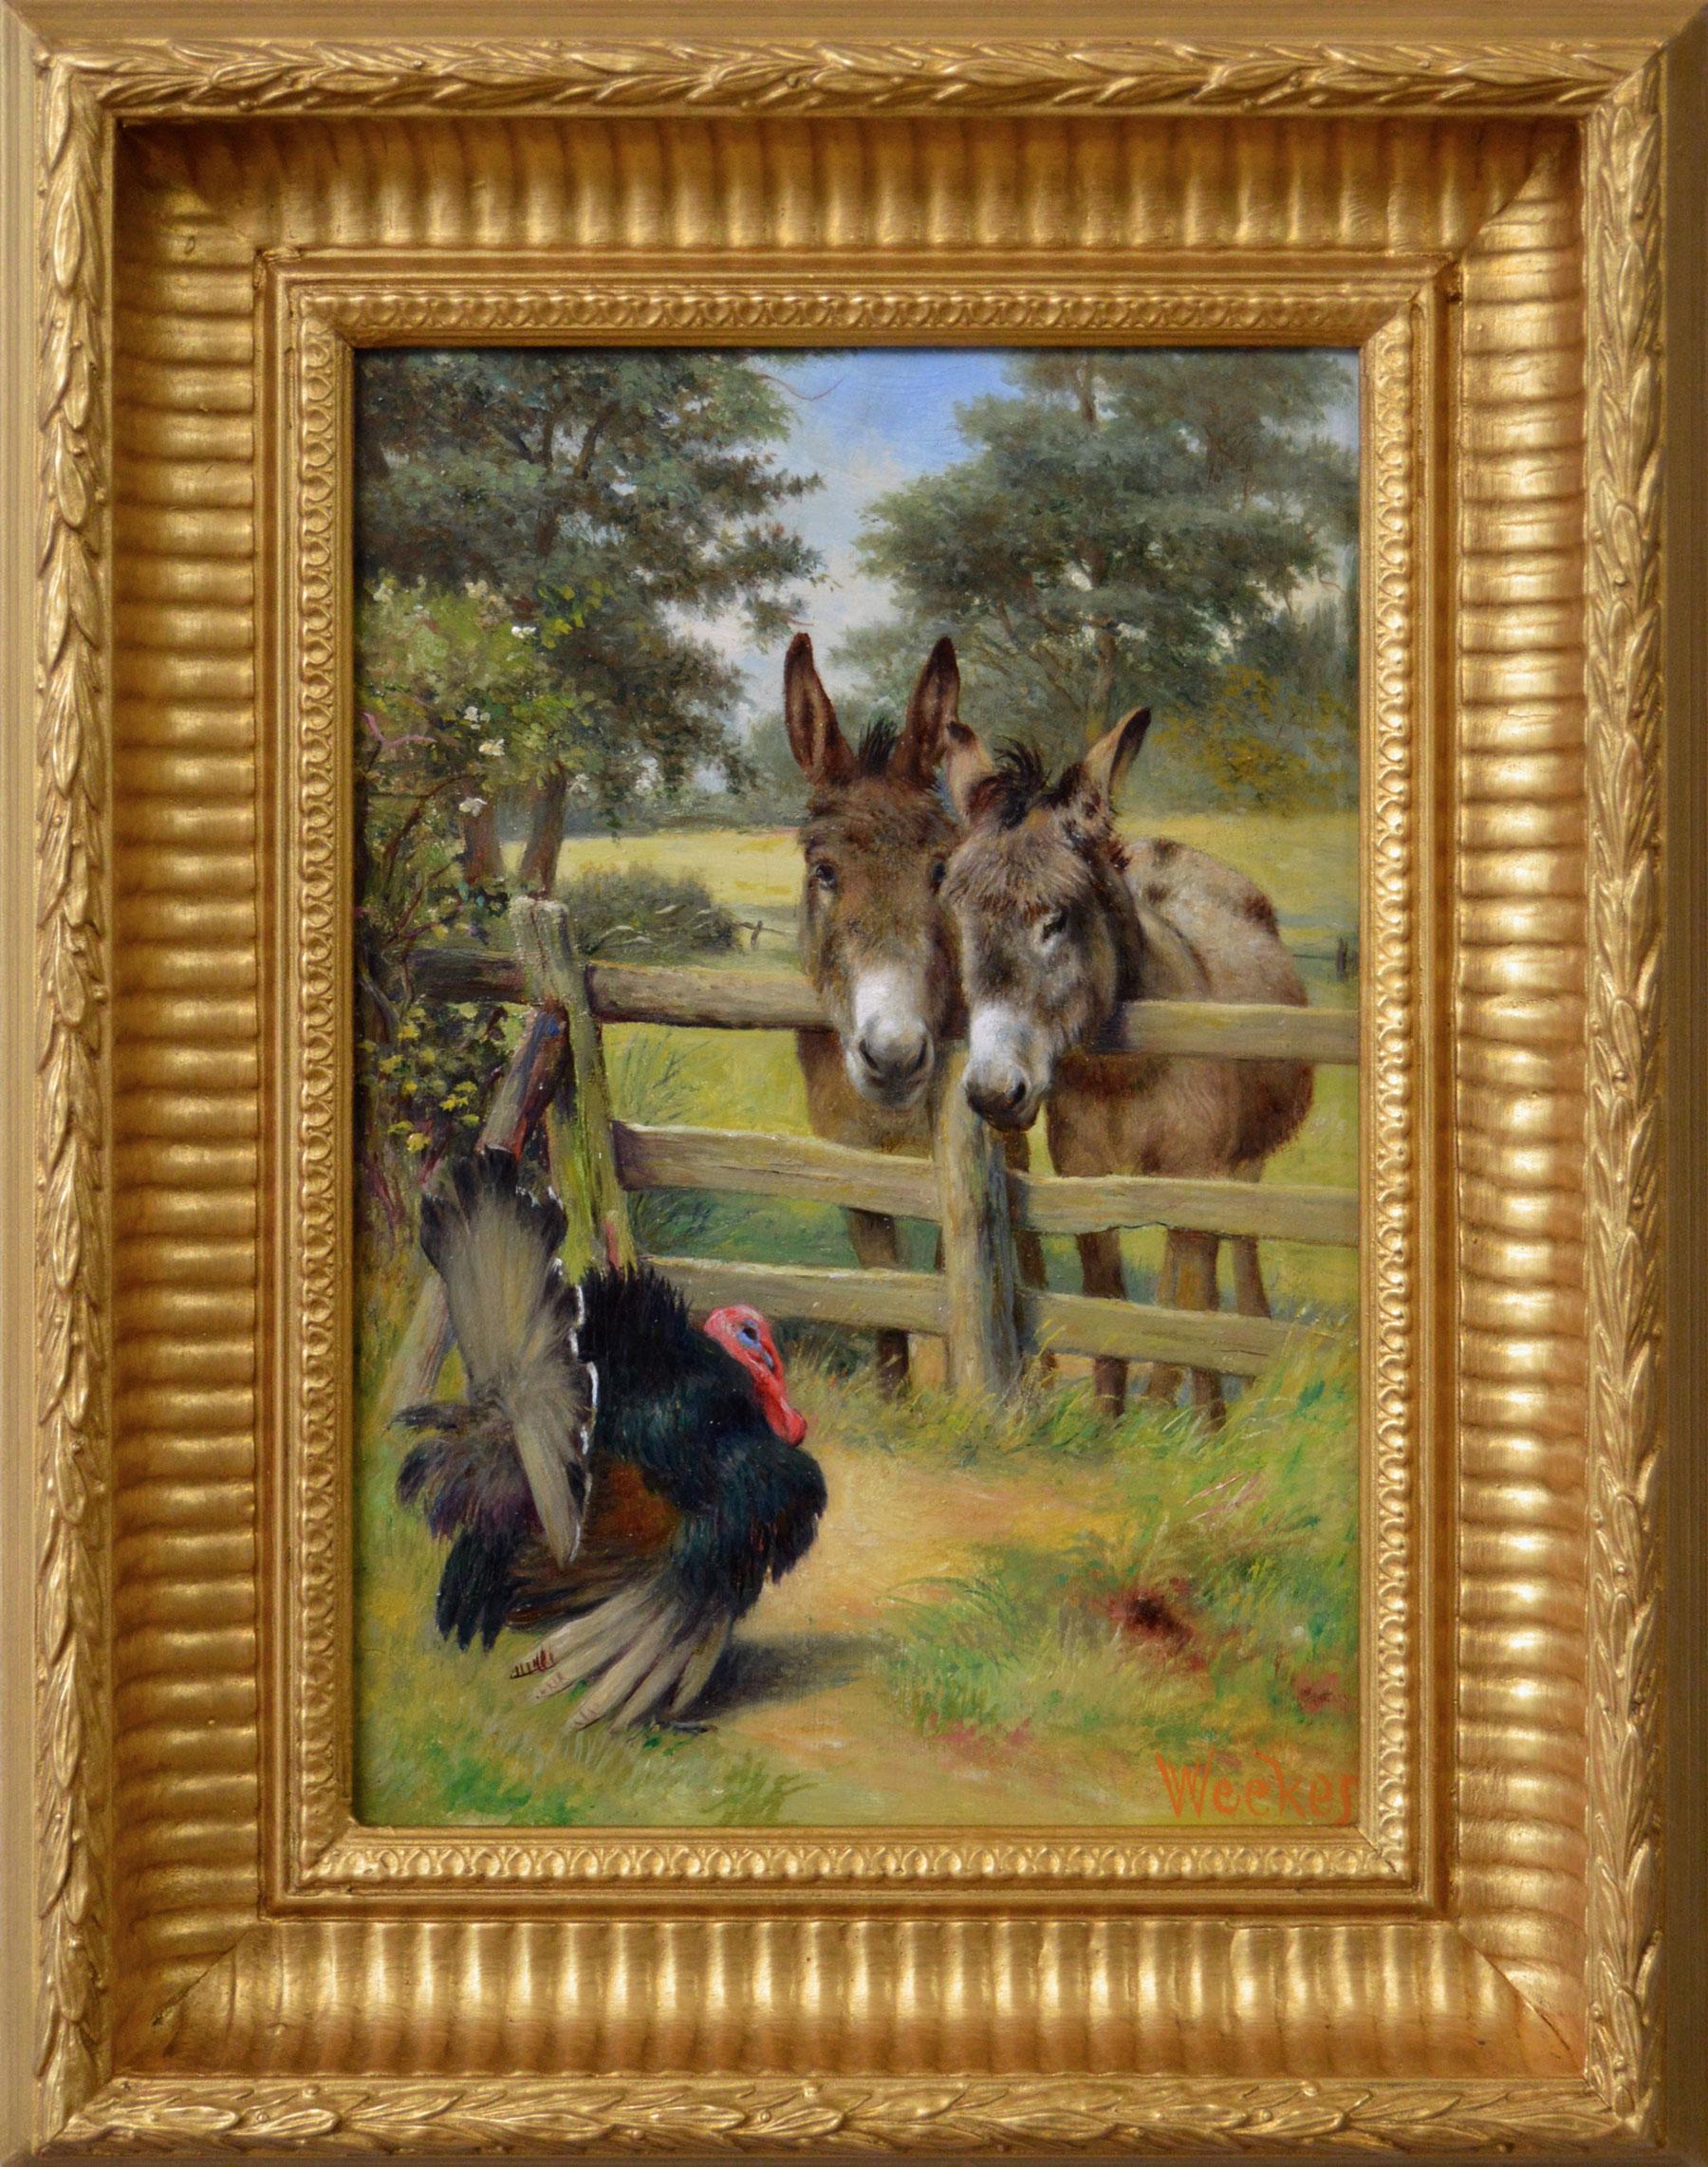 Herbert William Weekes Animal Painting - 19th Century genre oil painting of two donkeys with a turkey 